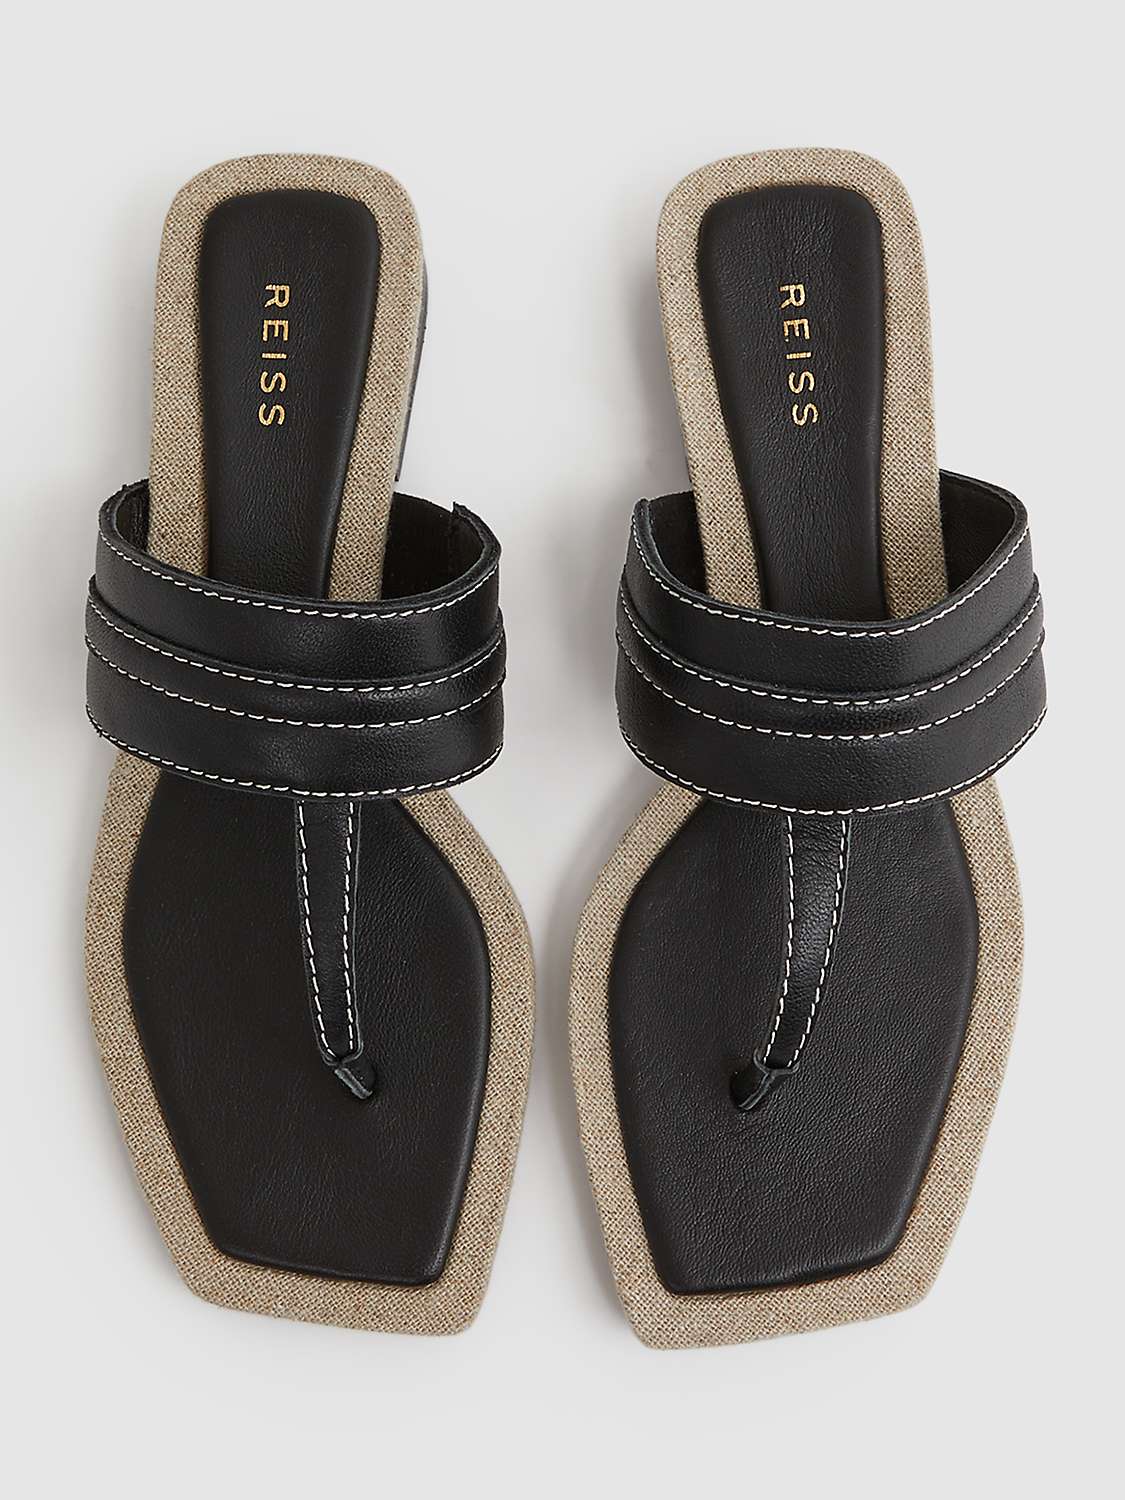 Buy Reiss Quinn Leather Thong Sandals Online at johnlewis.com